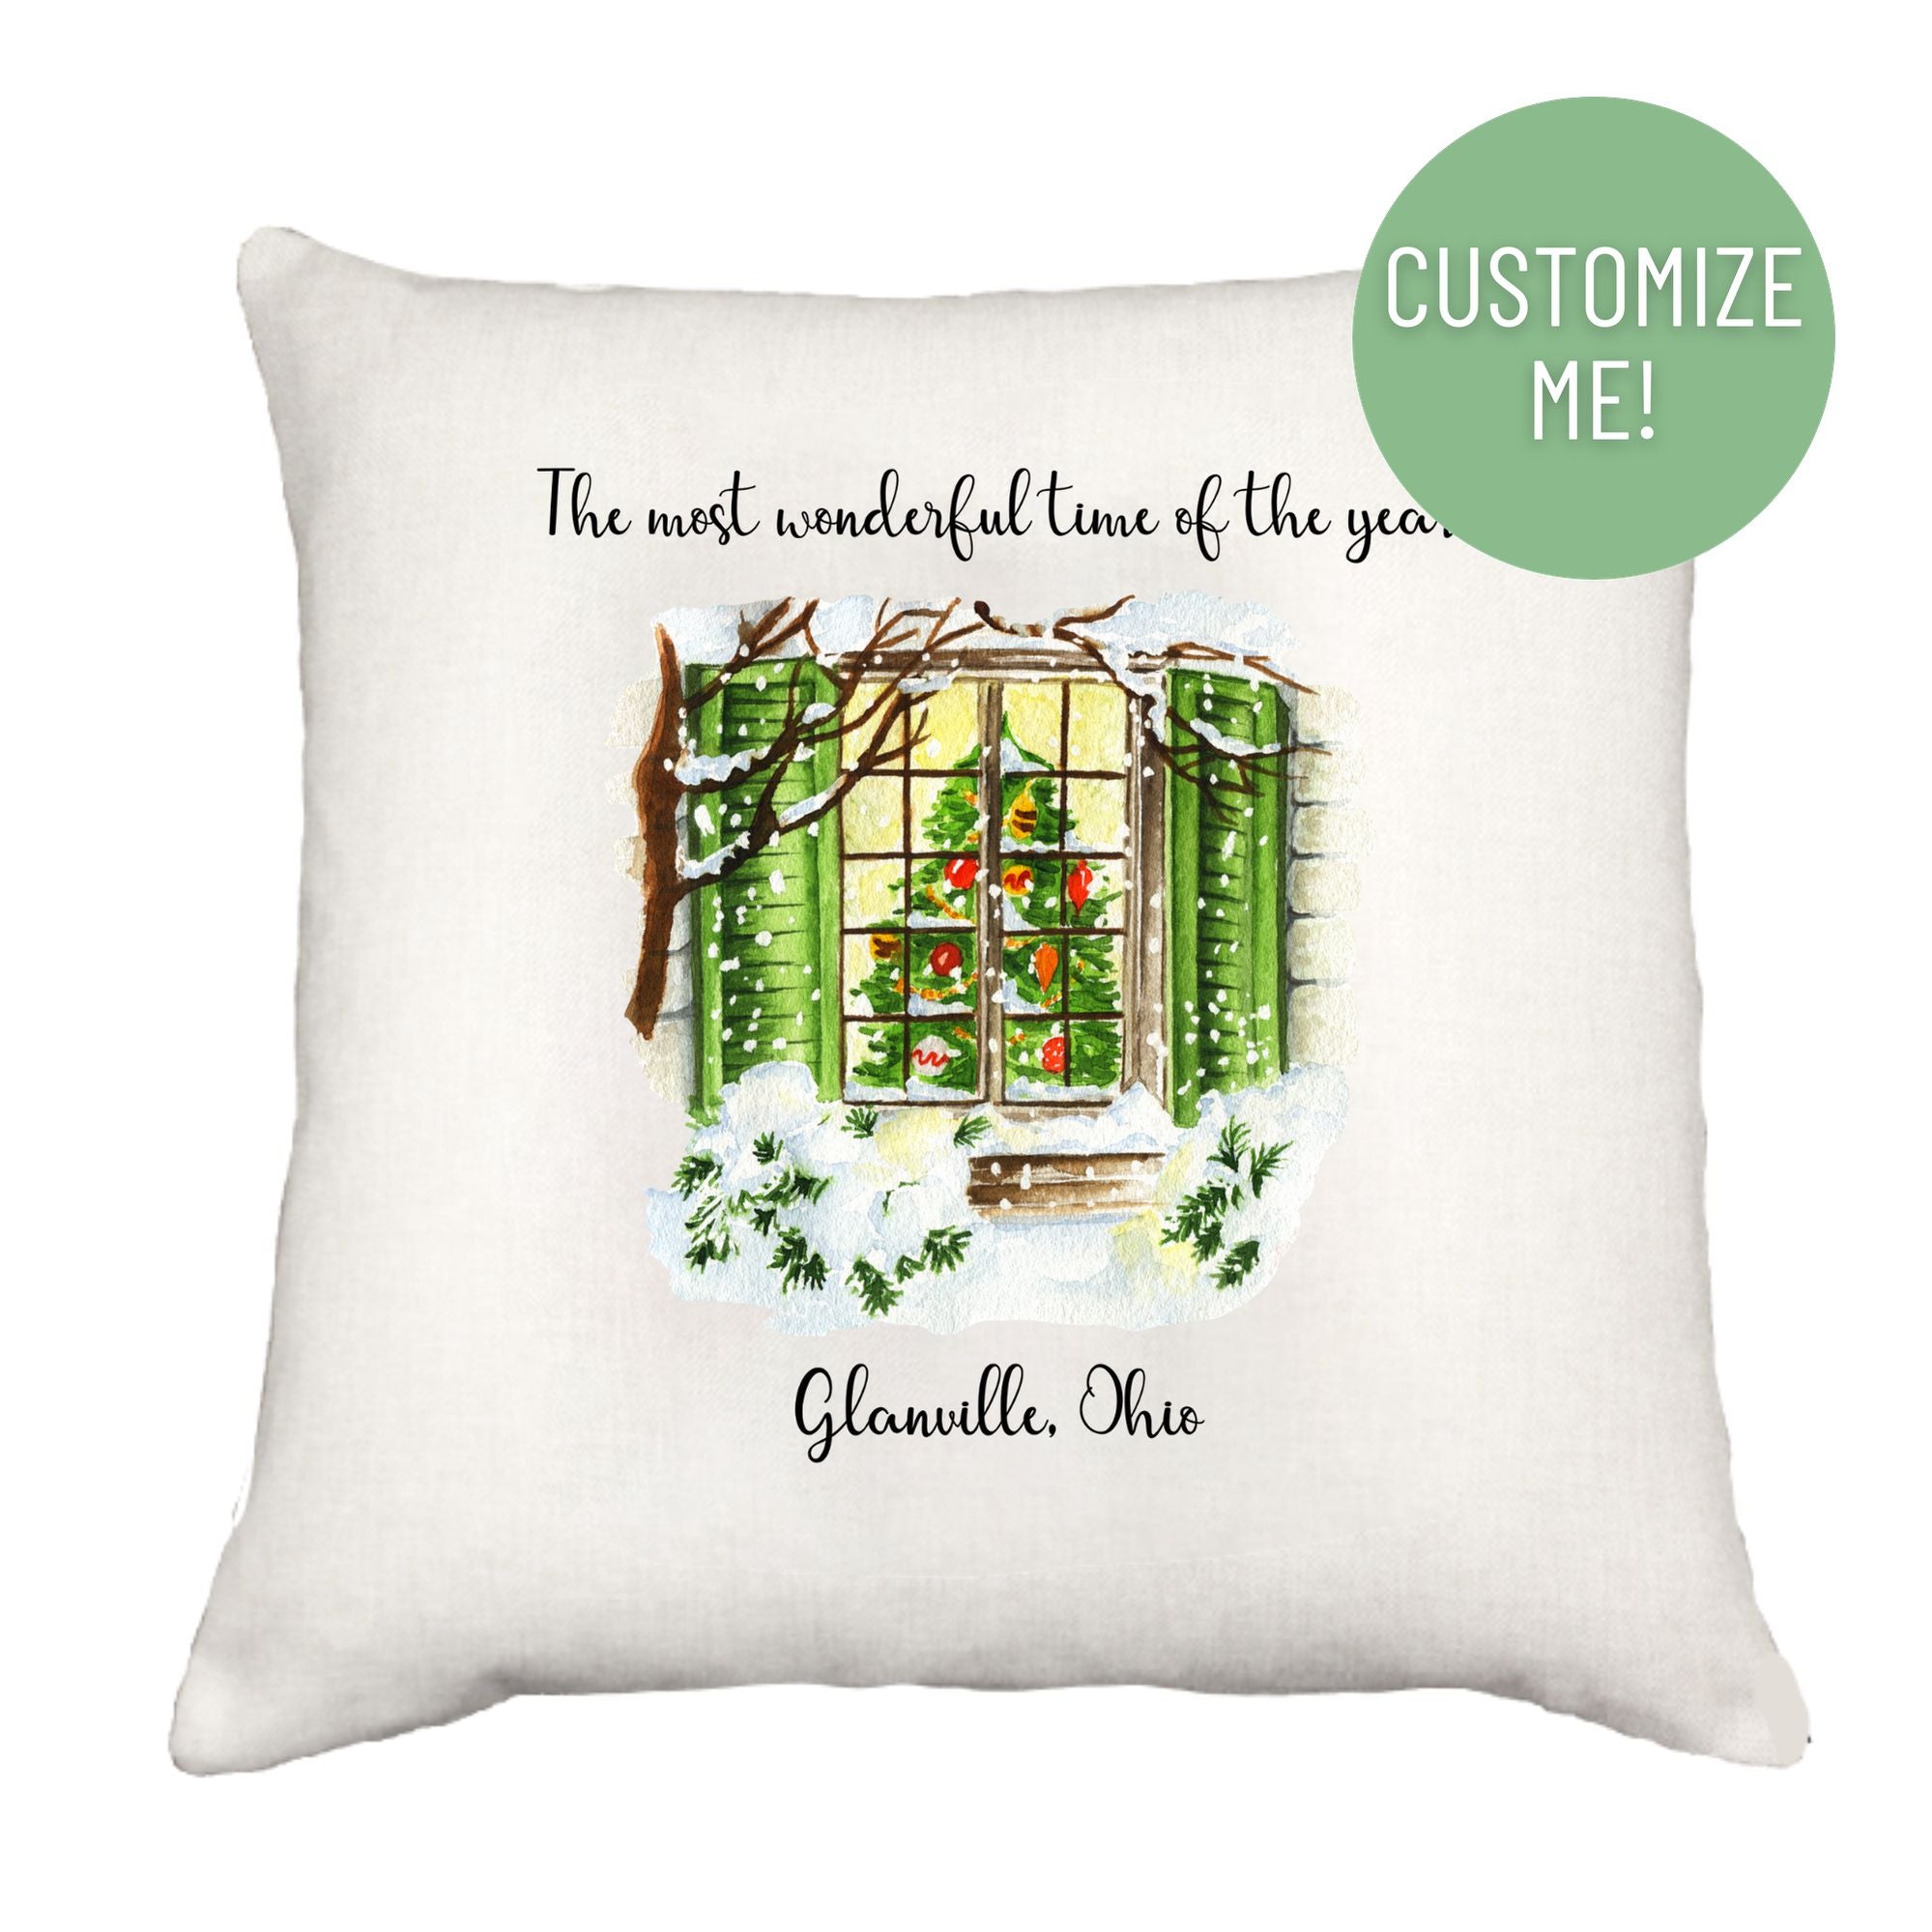 Most Wonderful Time Window Down Pillow